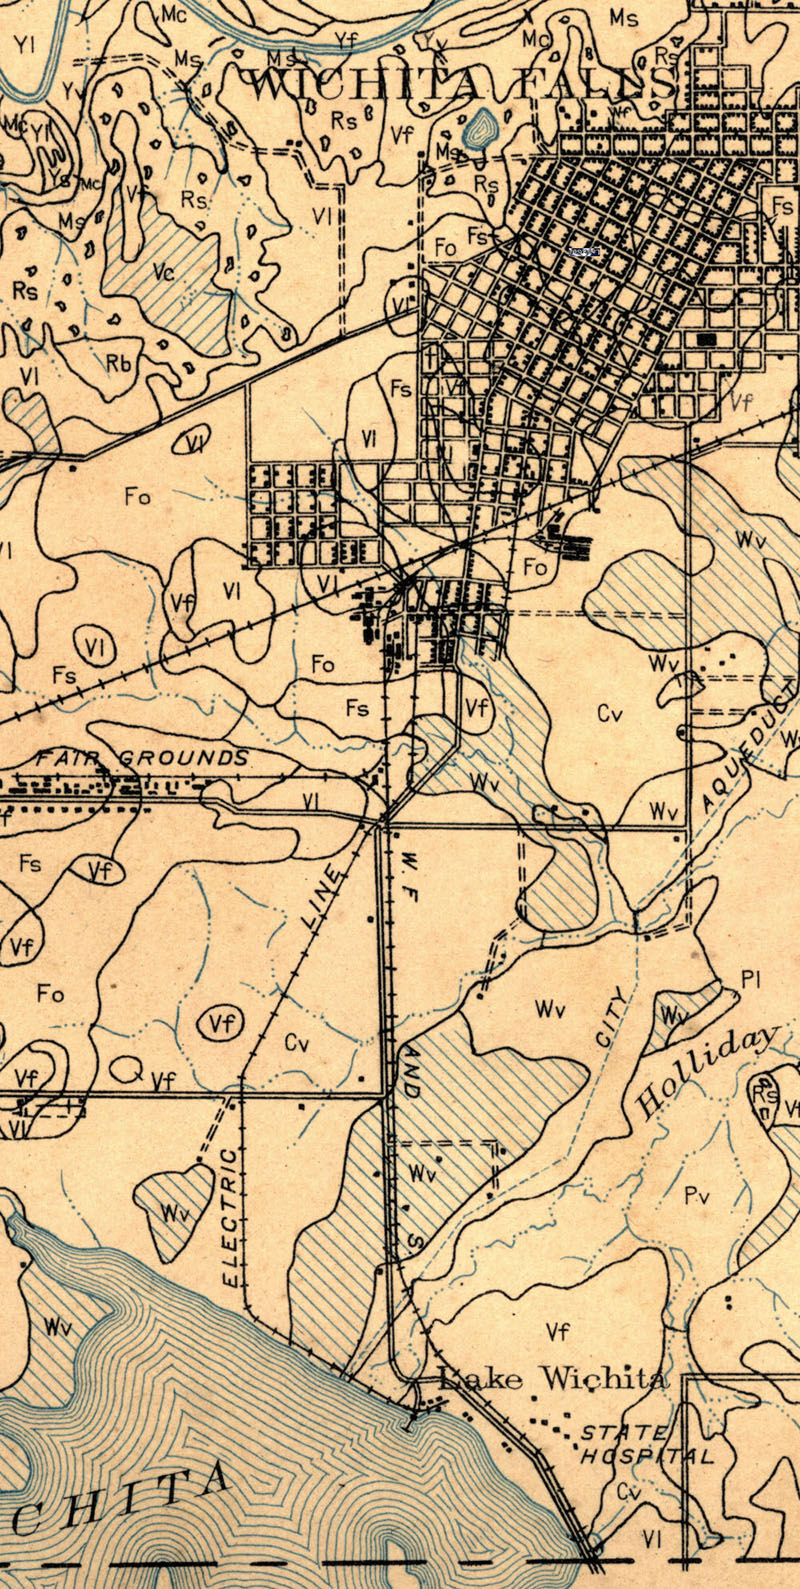 Wichita Falls Traction Company (Tex.), Map Showing Route to Lake Wichita in 1924.